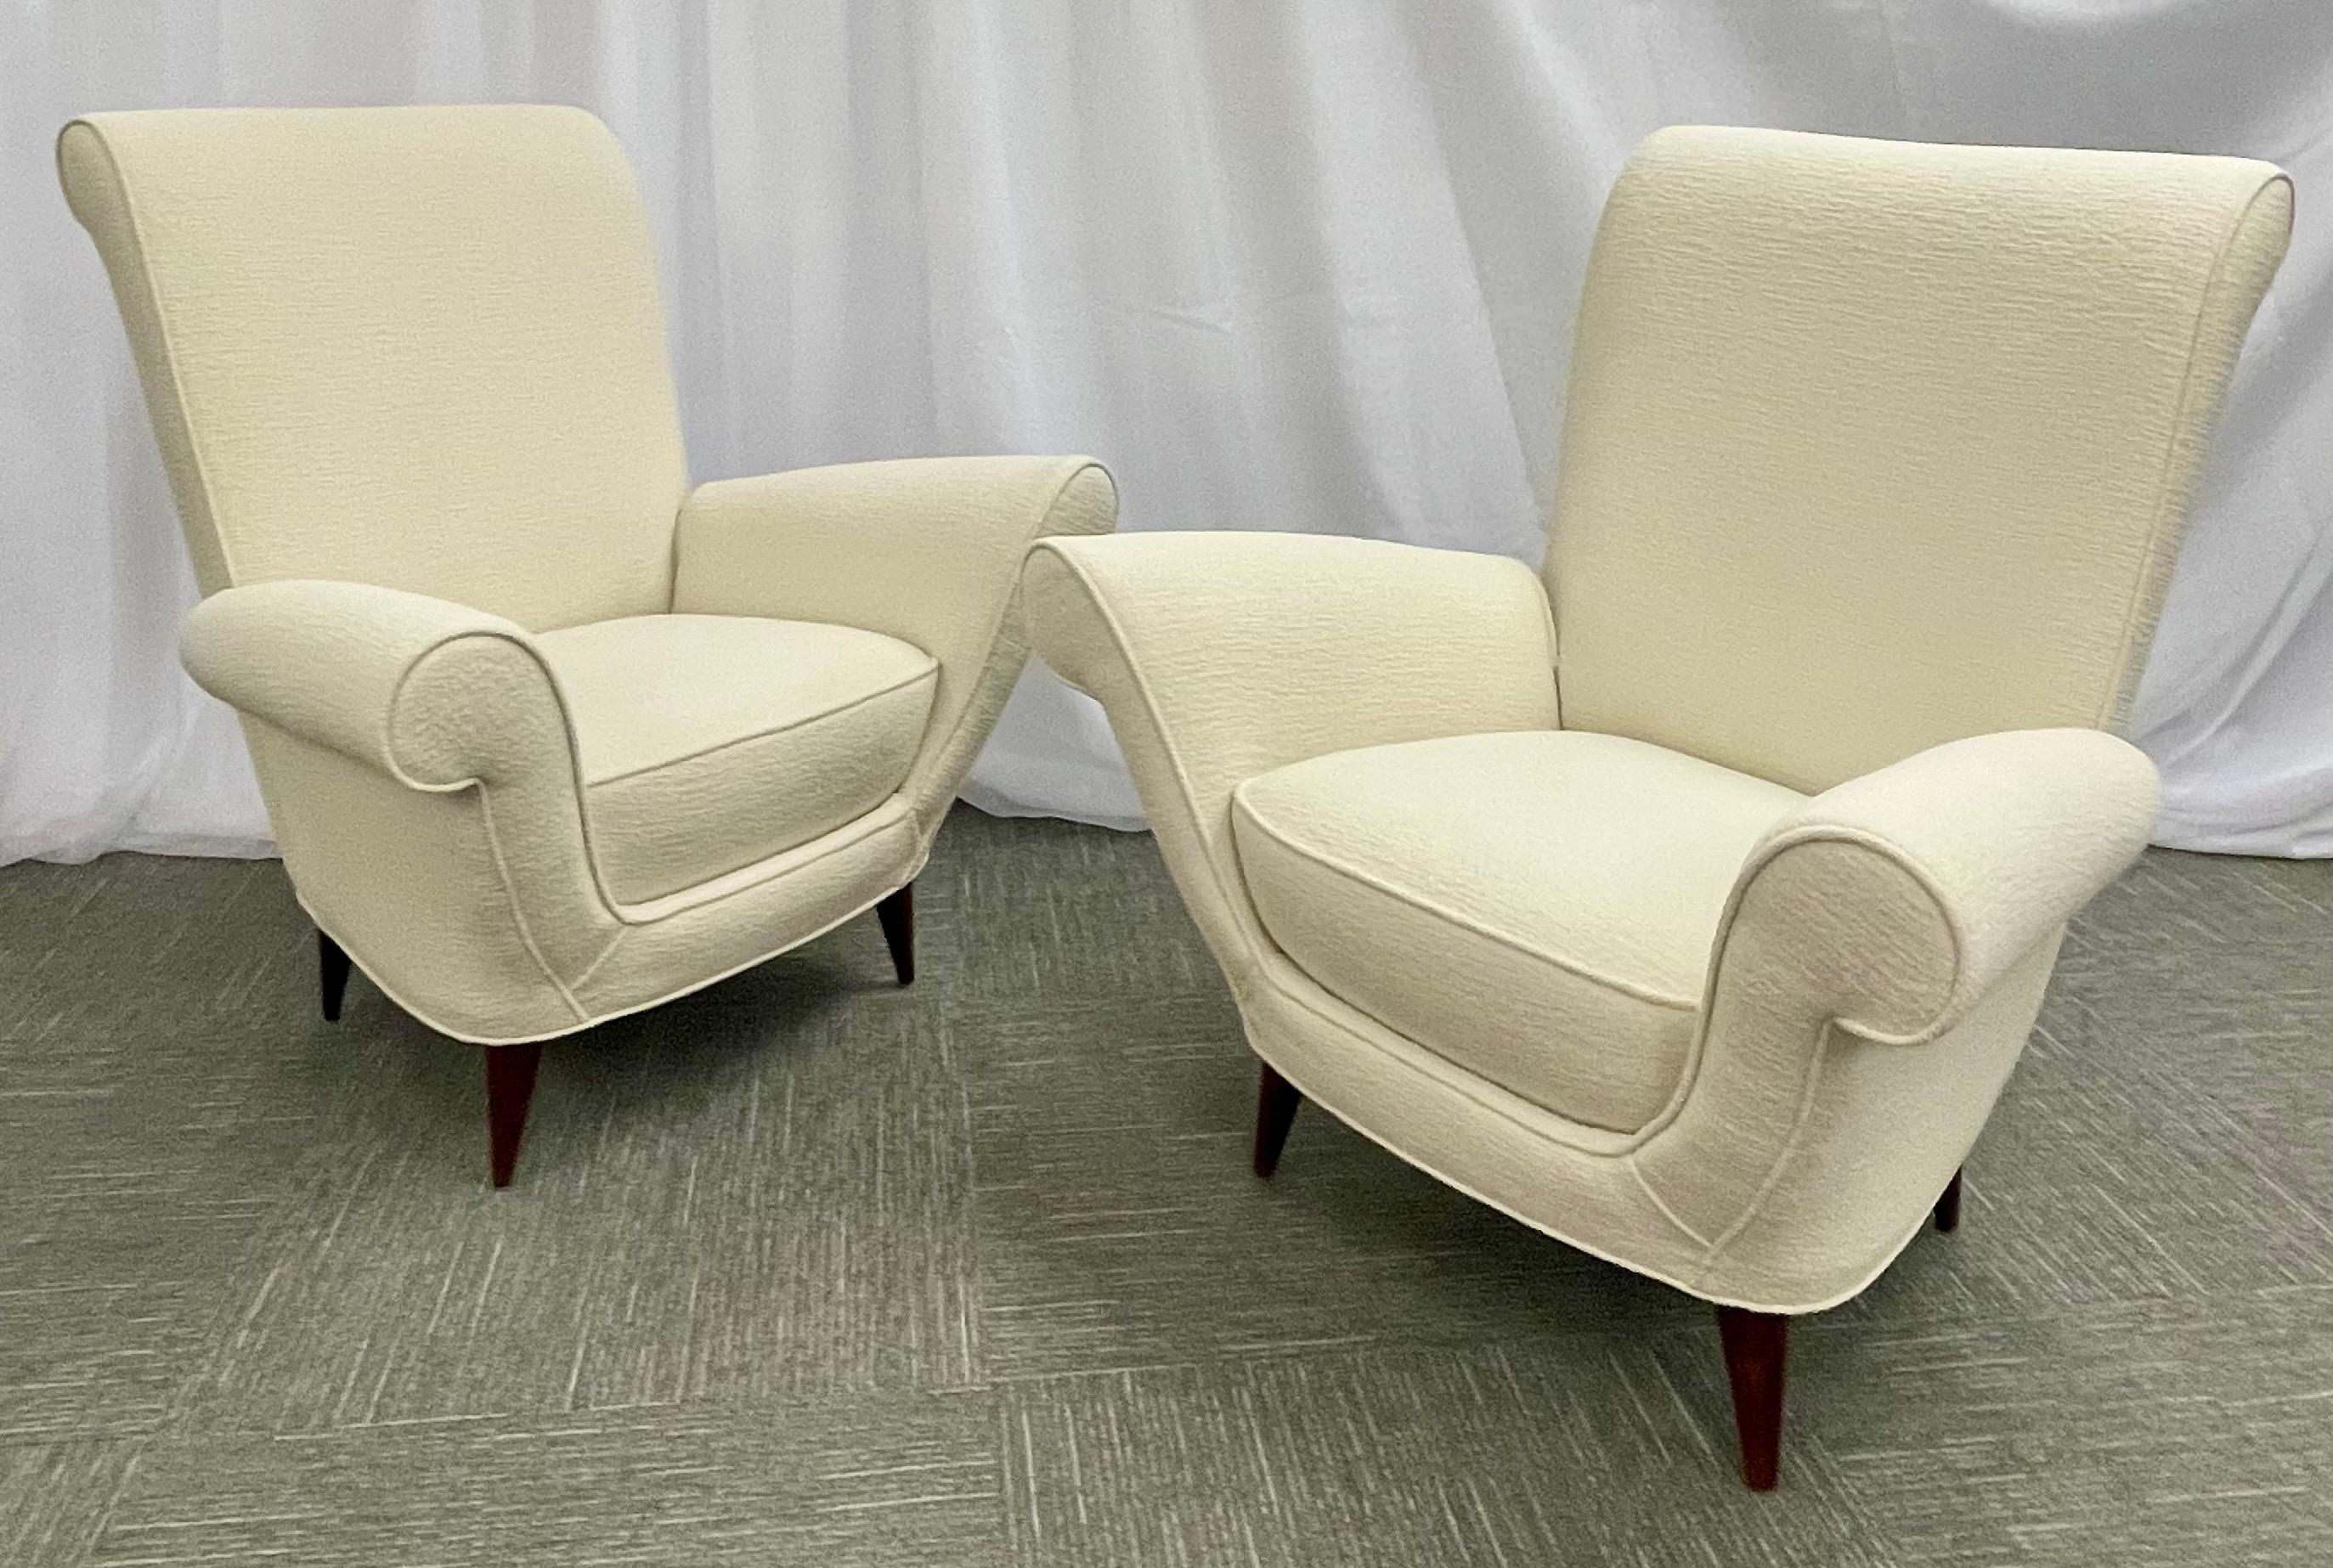 Italian Paola Buffa Style, Mid-Century Modern, Lounge Chairs, White Bouclé, Italy, 1960s For Sale